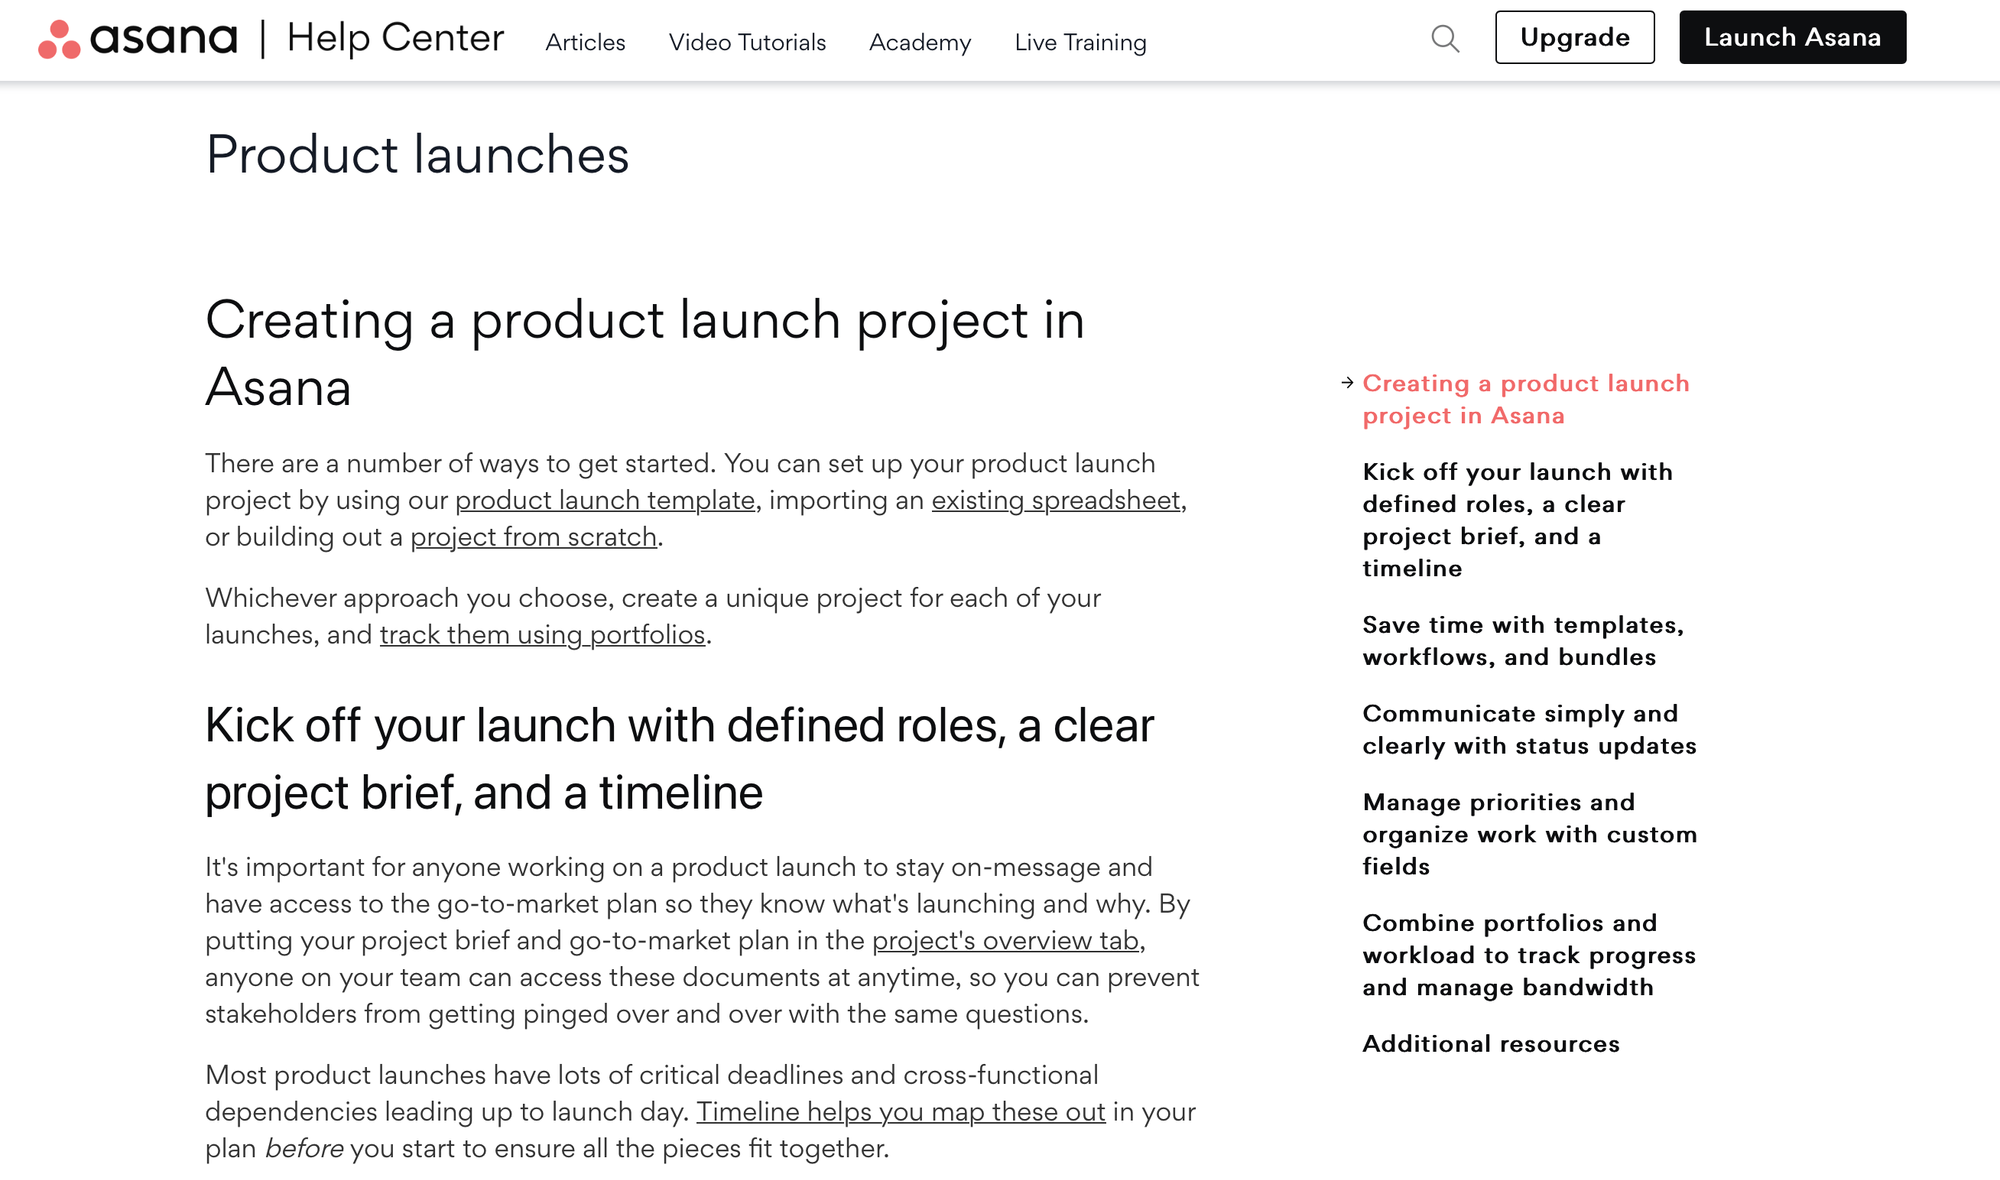 Screenshot of Asana article for product launches